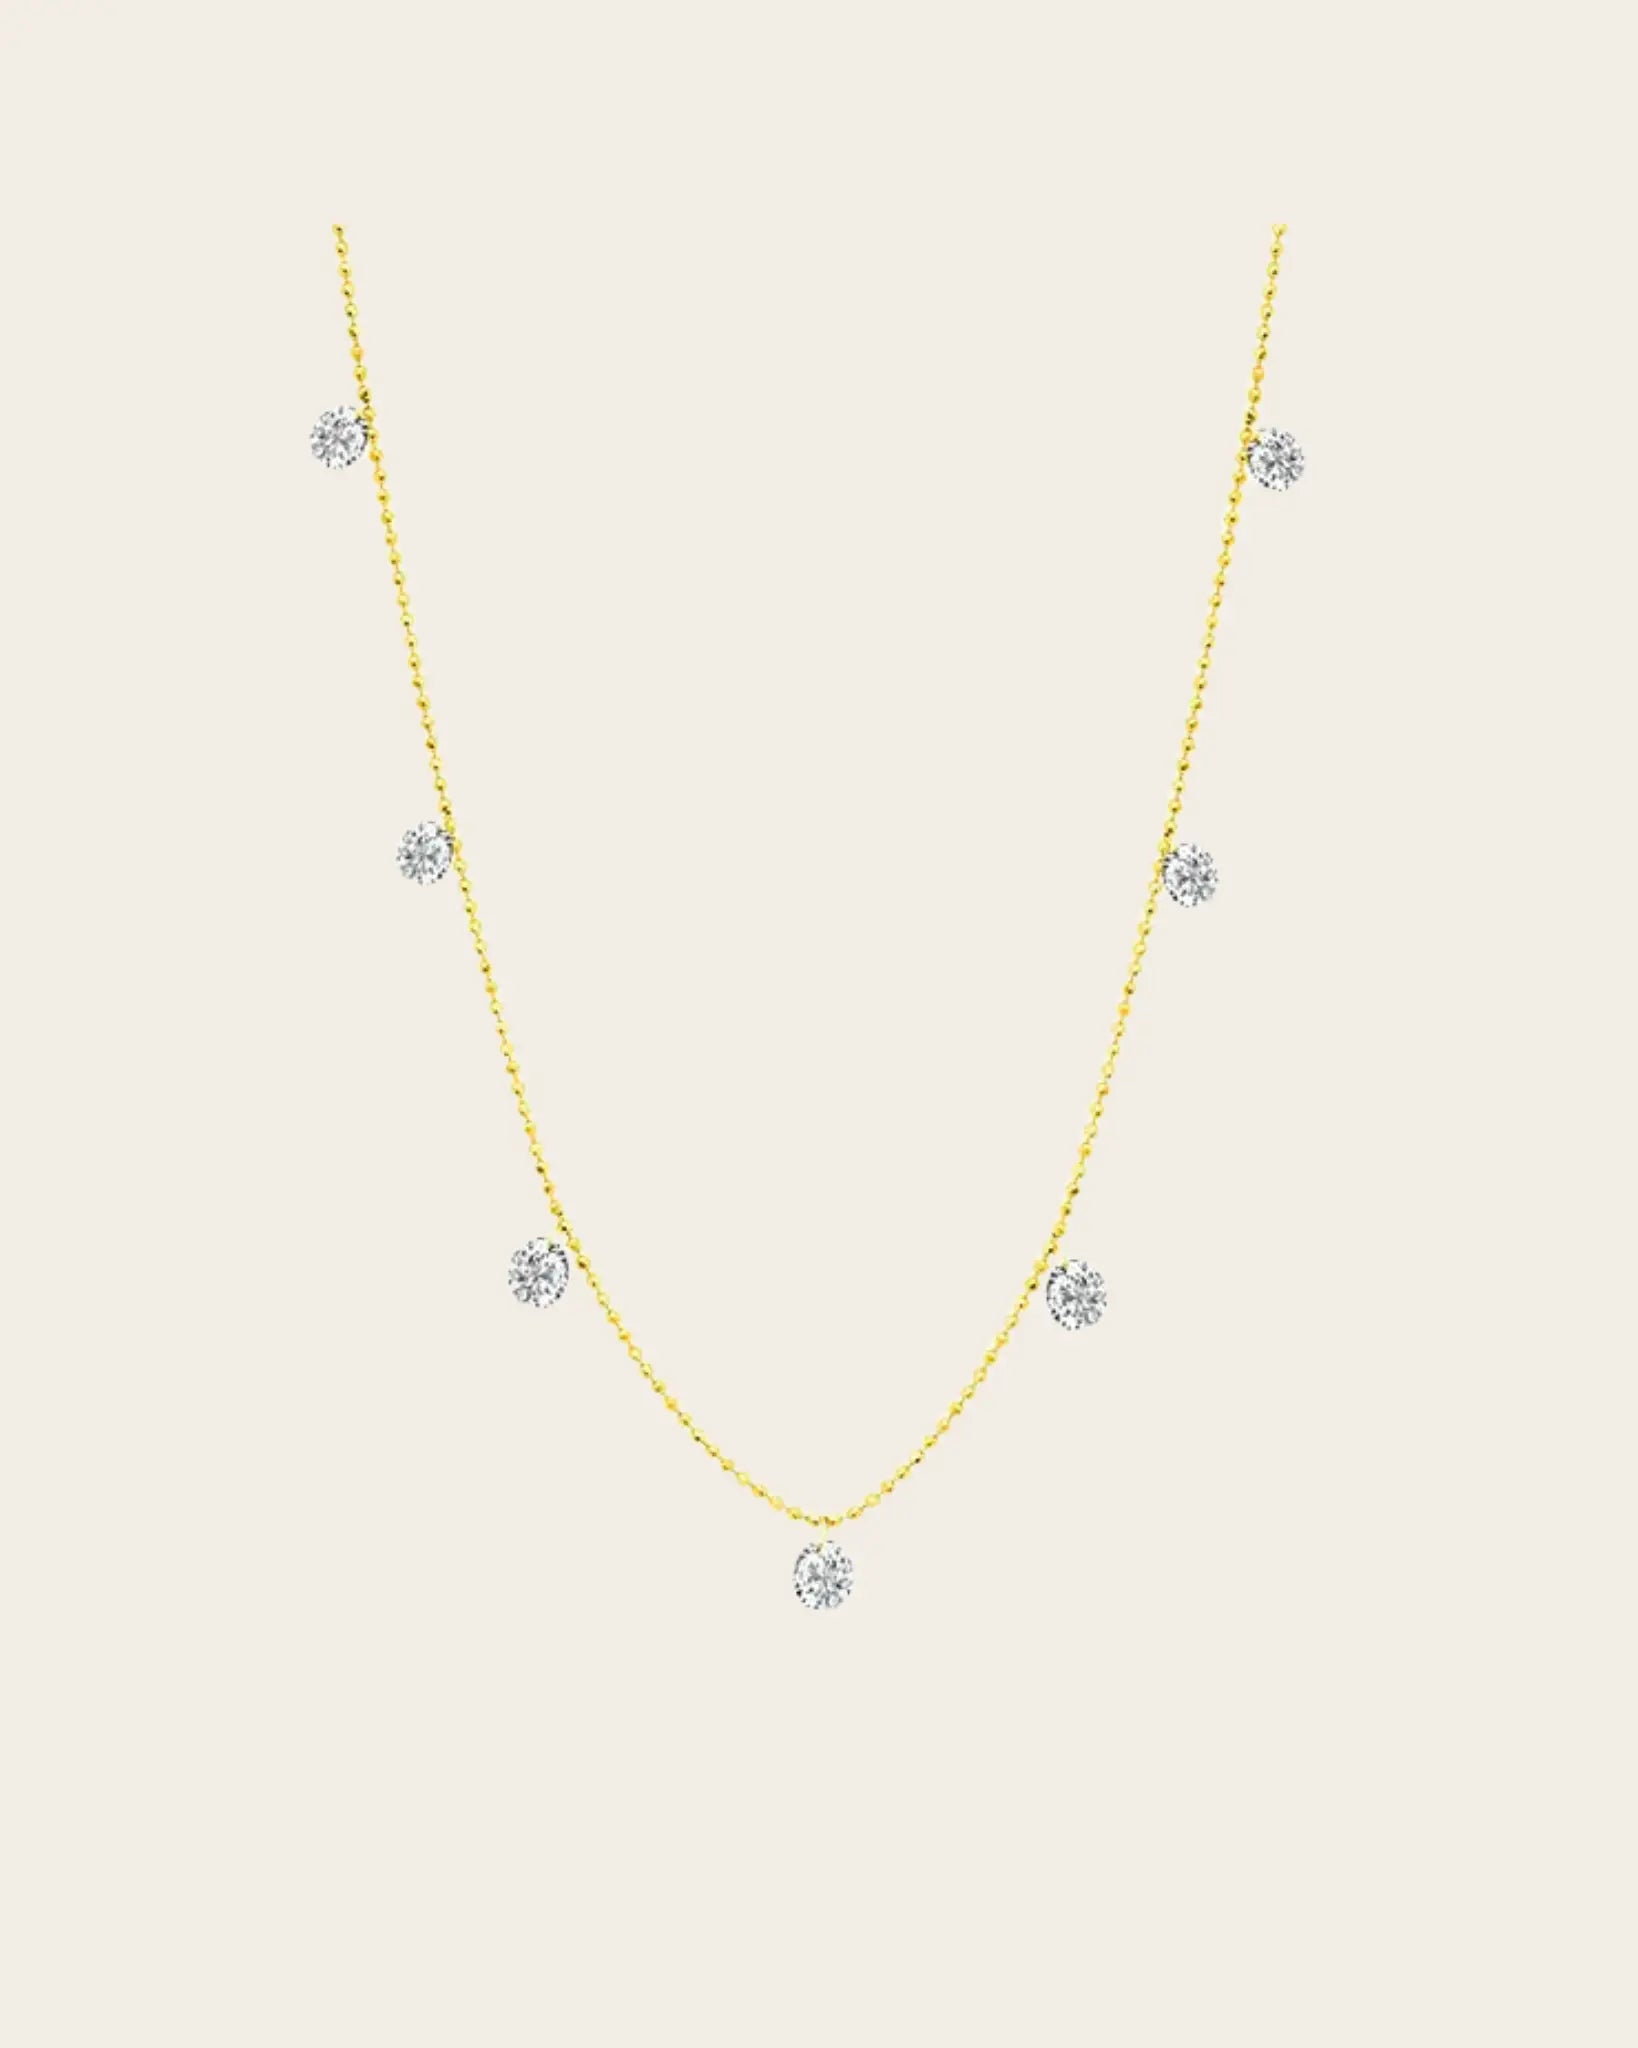 Small Floating 5 Diamond Necklace Small Floating 5 Diamond Necklace Graziela Gems Graziela Gems  Squash Blossom Vail